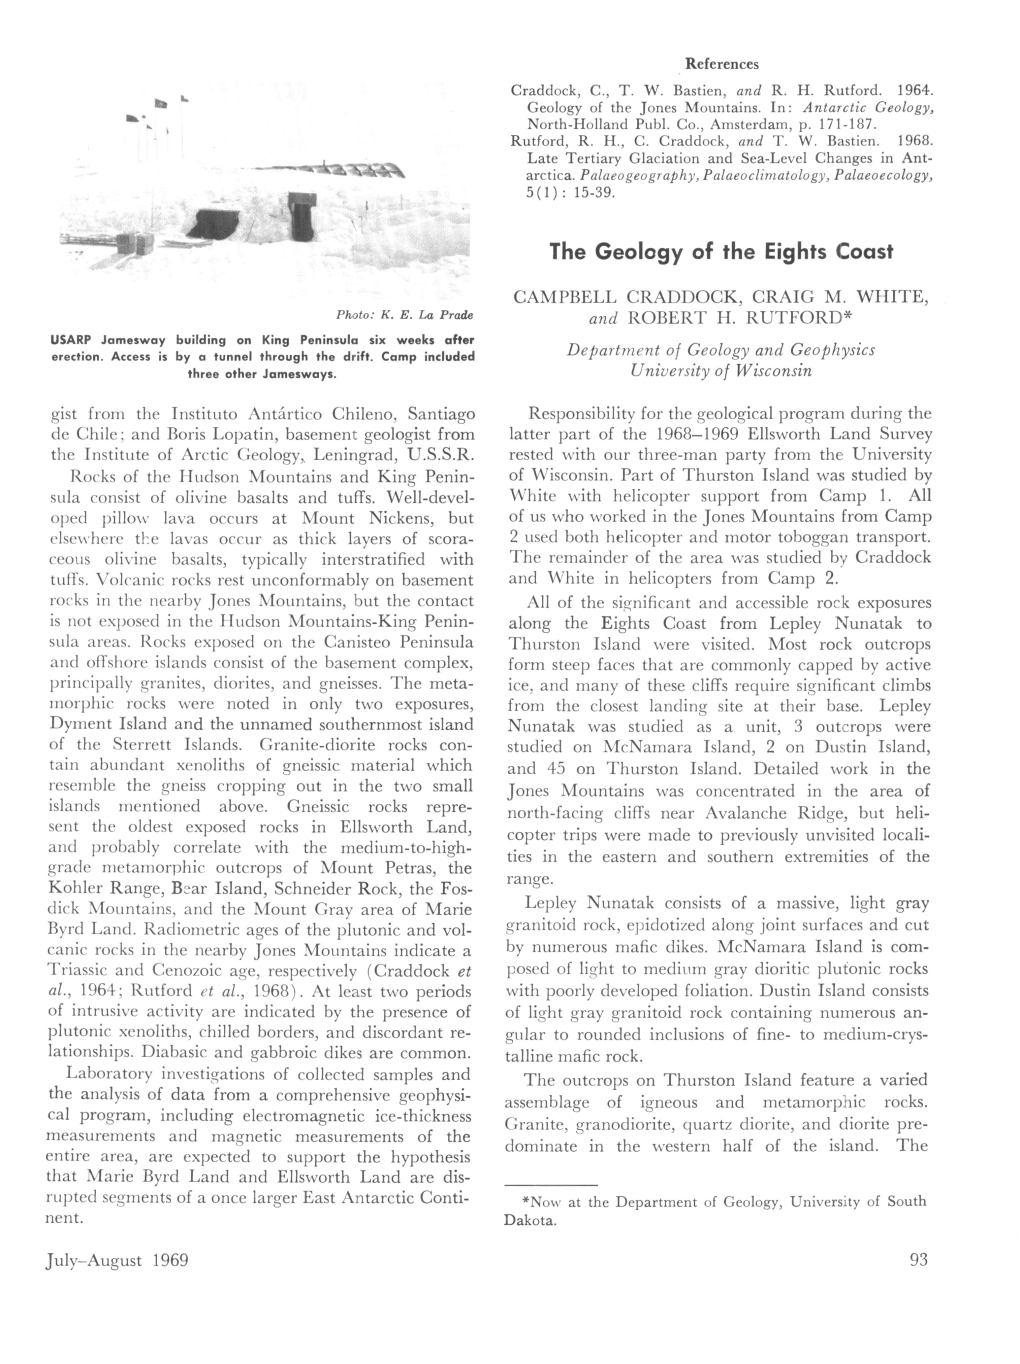 The Geology of the Eights Coast Ar CAMPBELL CRADDOCK, CRAIG M